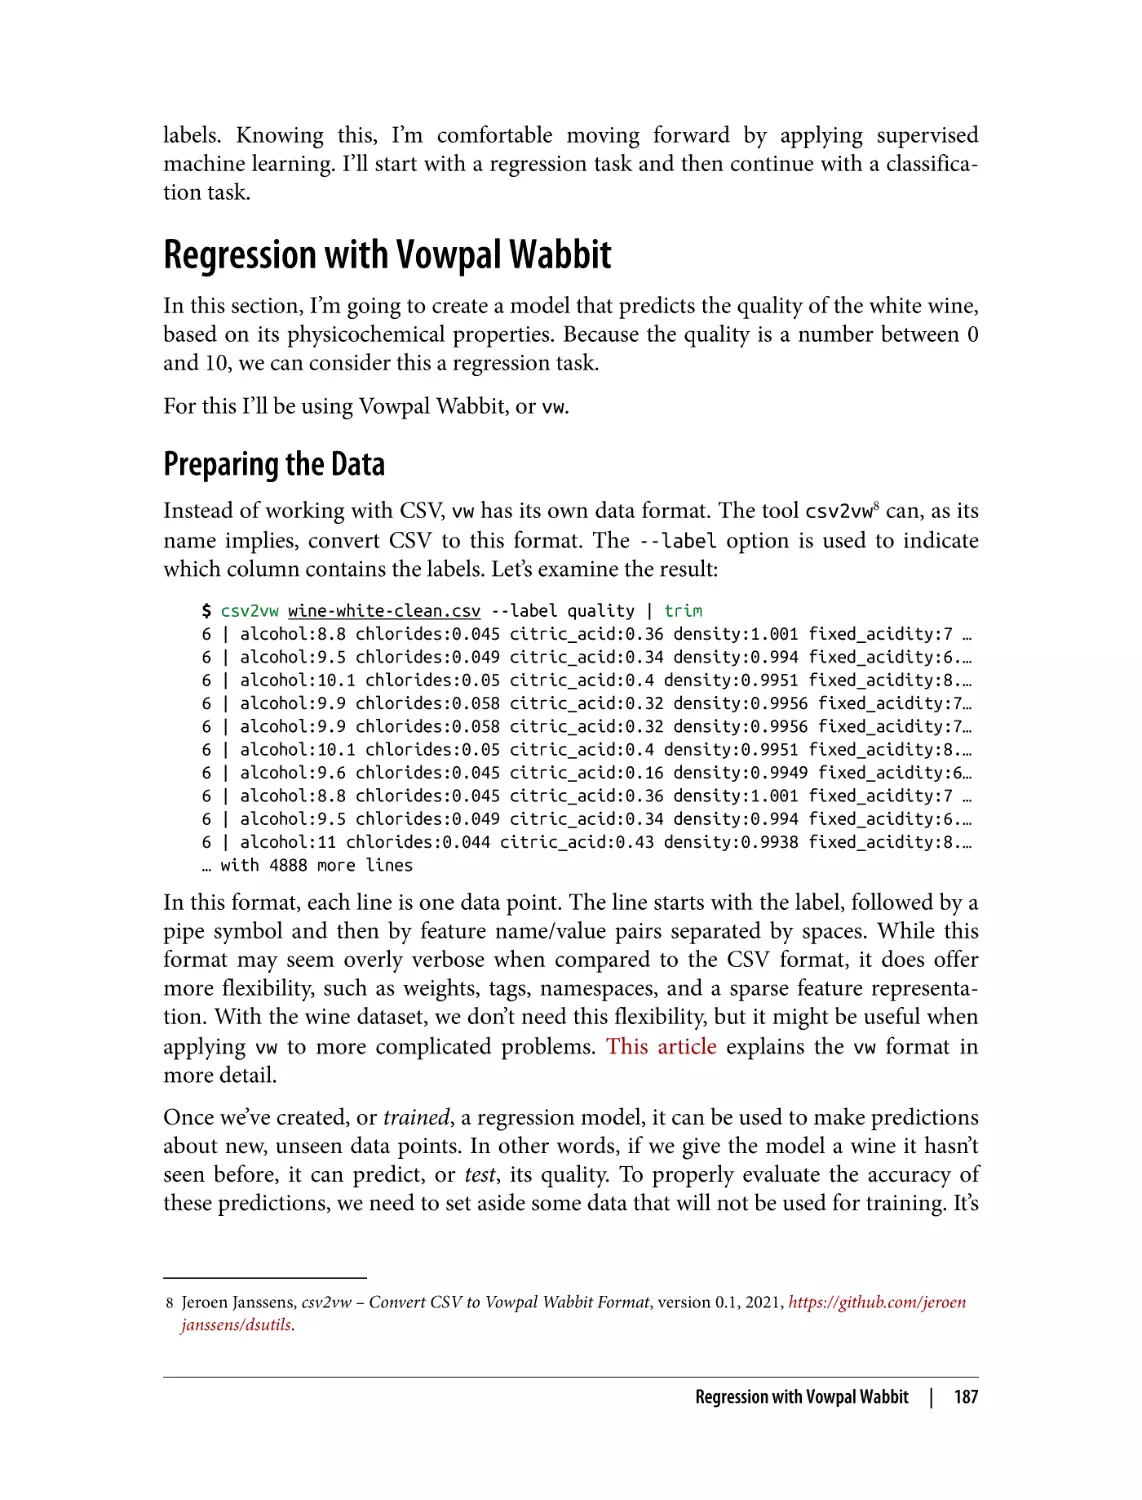 Regression with Vowpal Wabbit
Preparing the Data